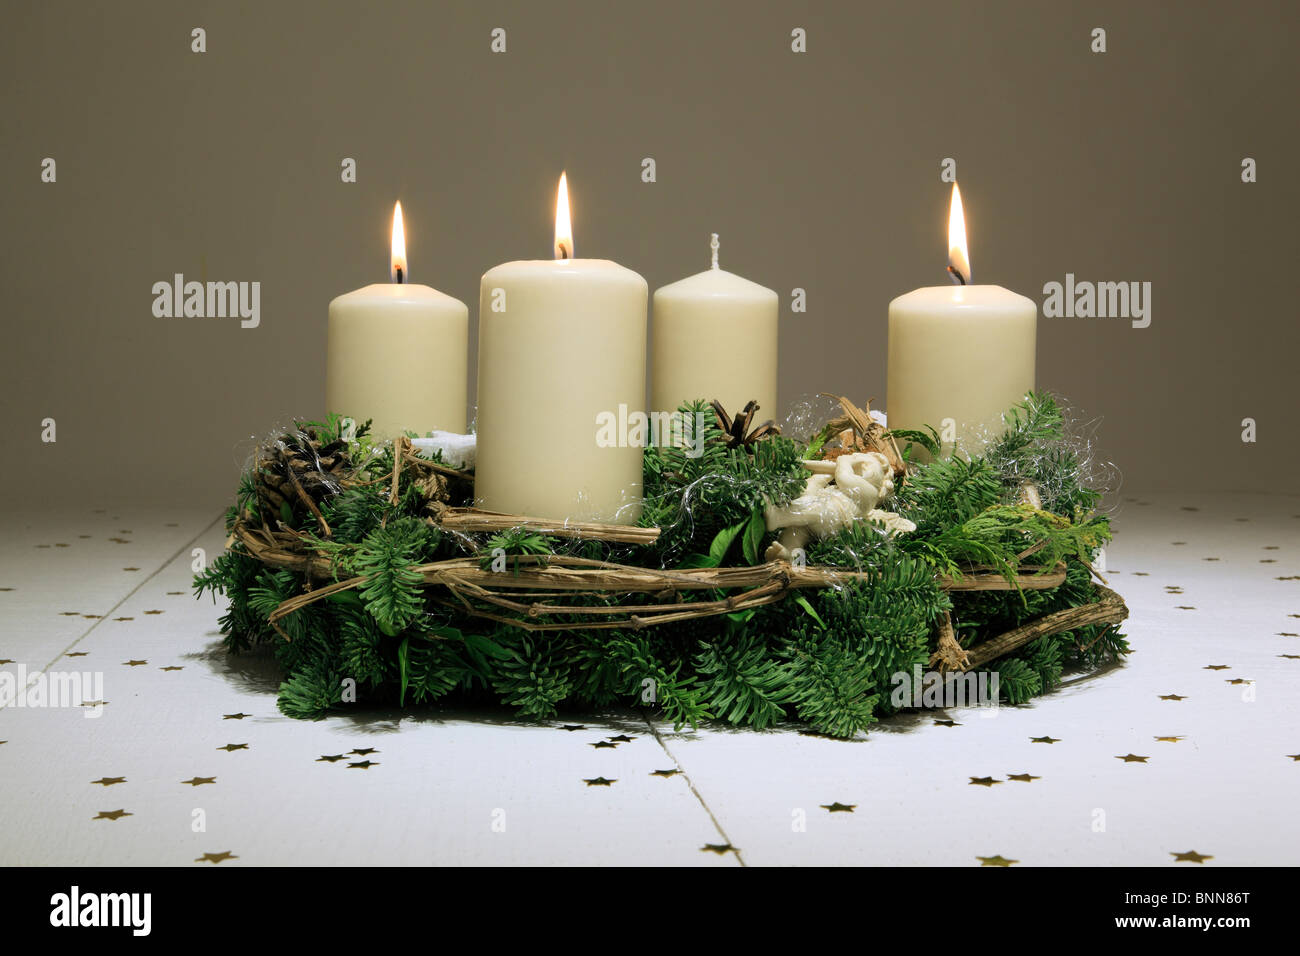 3 4 Advent Advent wreath Advent time Deko decoration adornment angel flame flames wood wooden boards candle candles Stock Photo